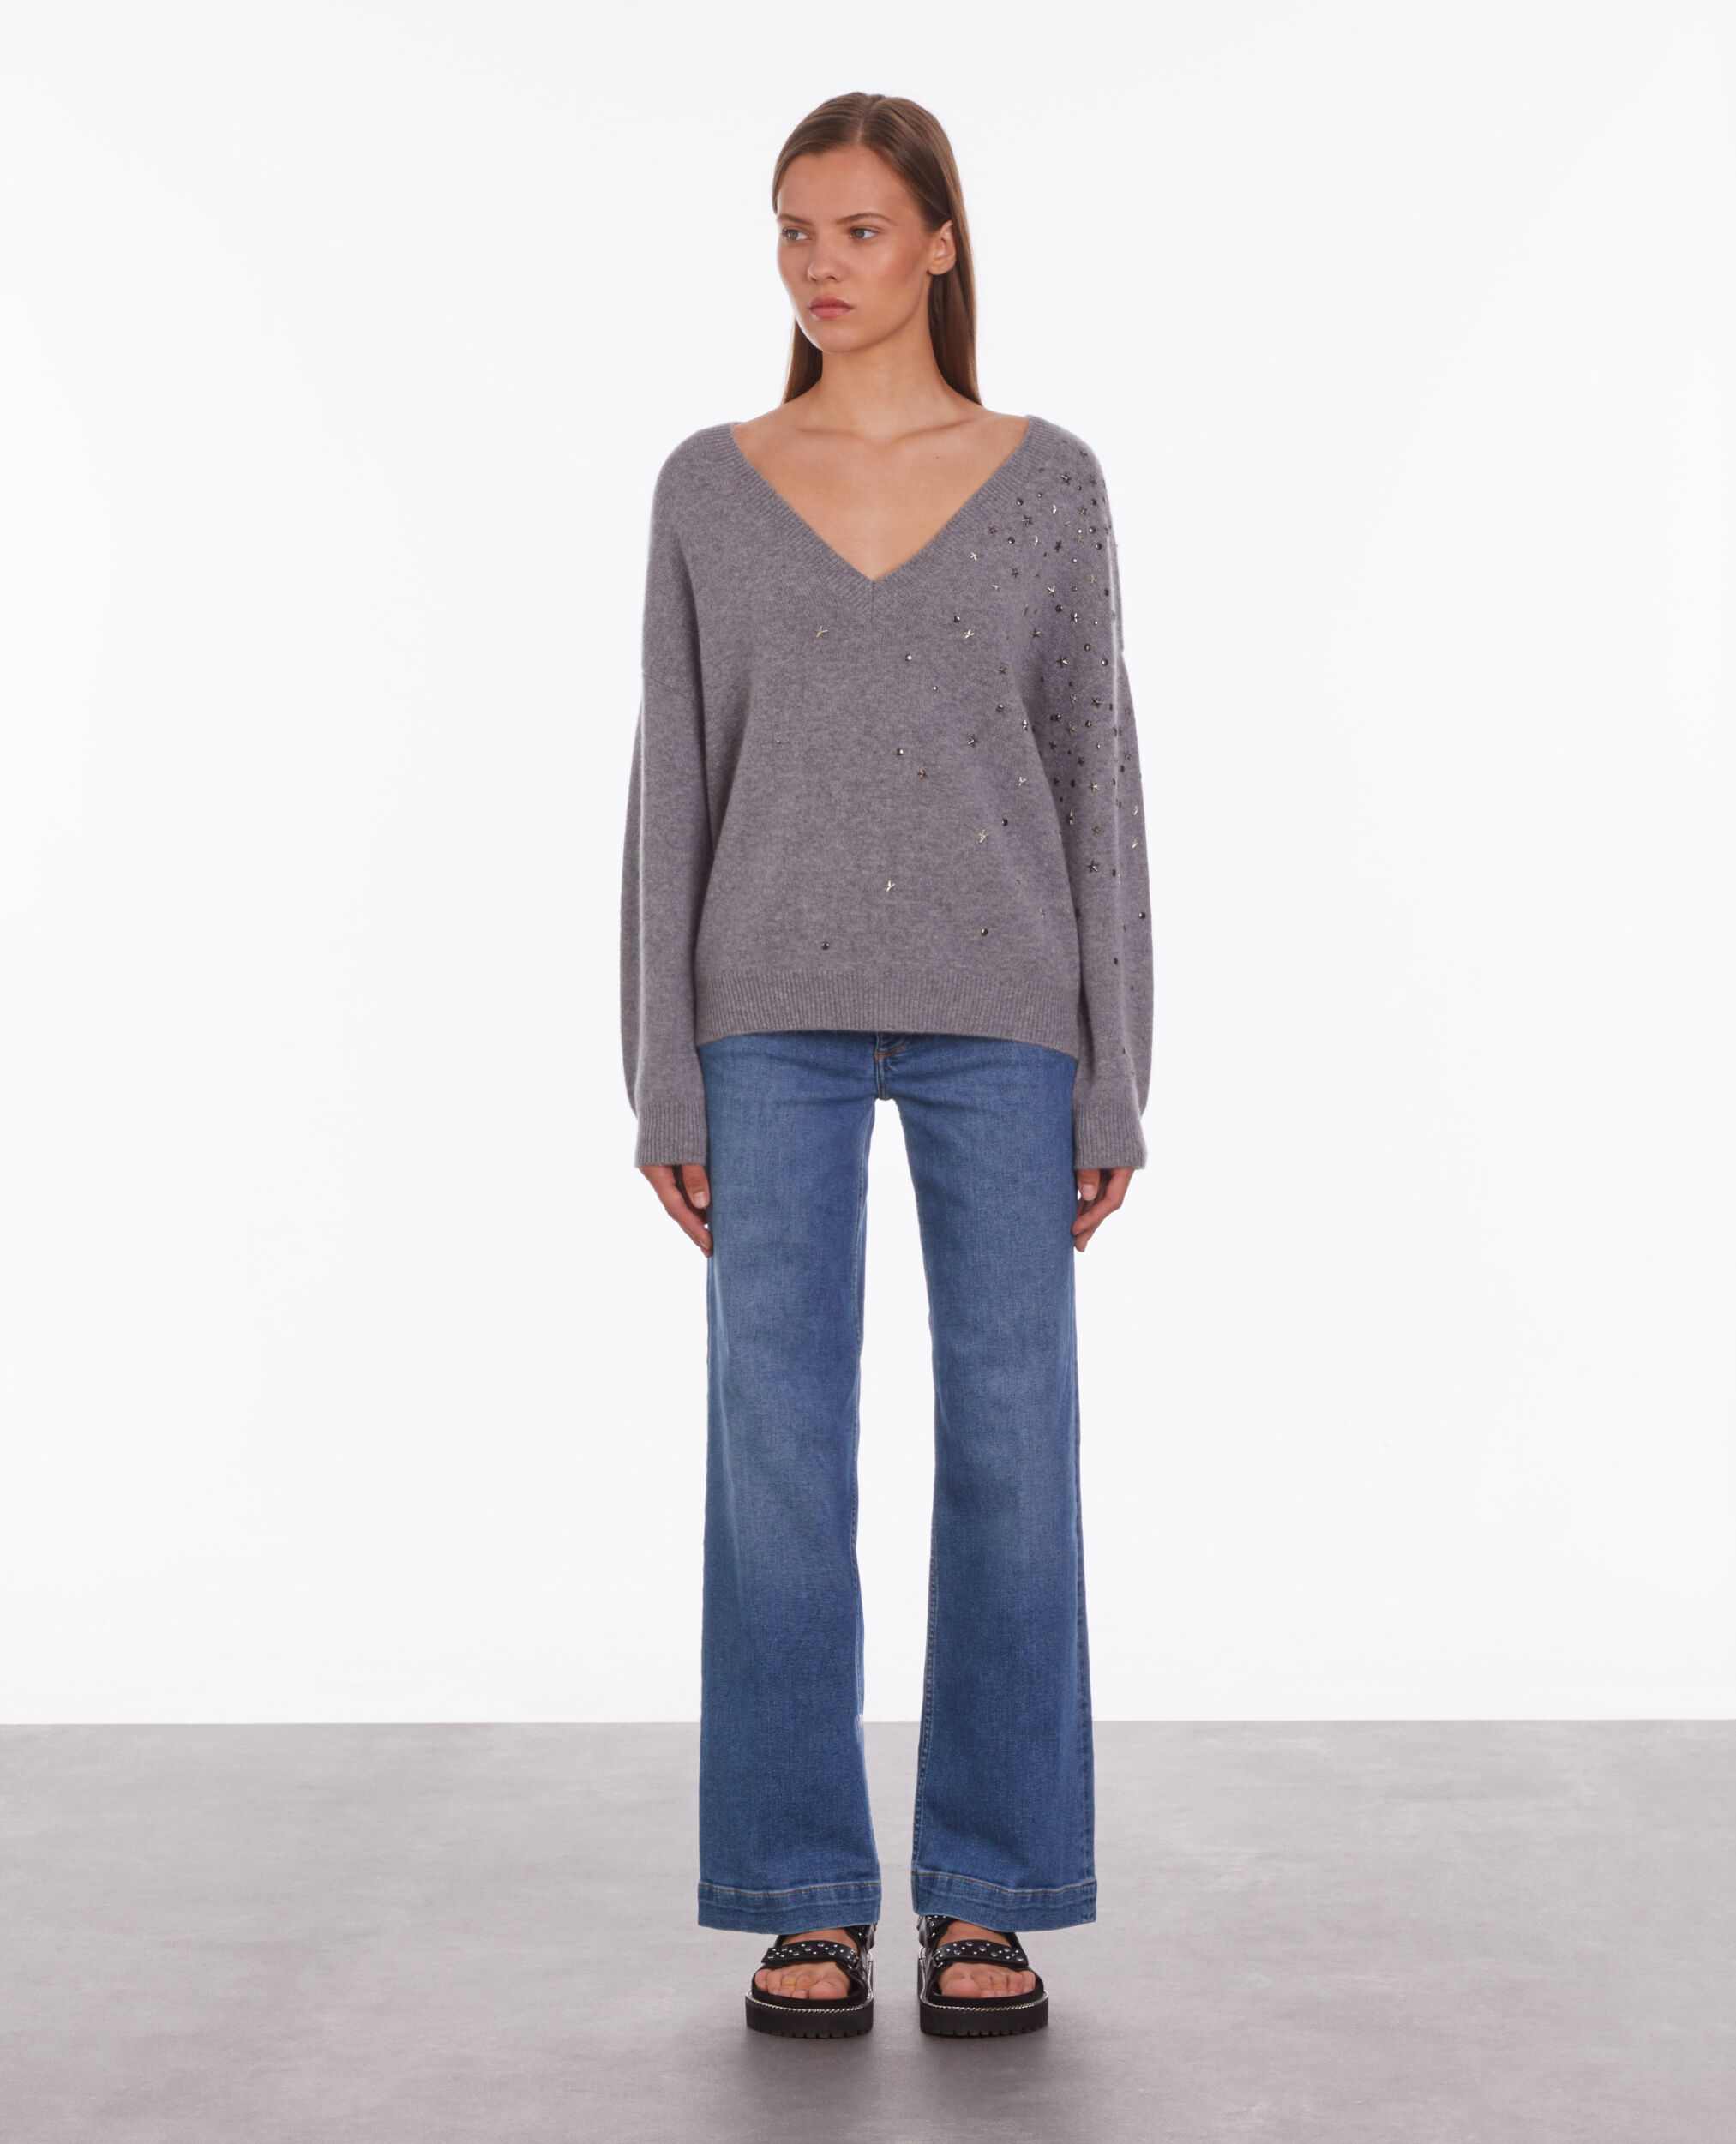 Grey sweater in cashmere-blend with stars, MIDDLE GREY MEL, hi-res image number null